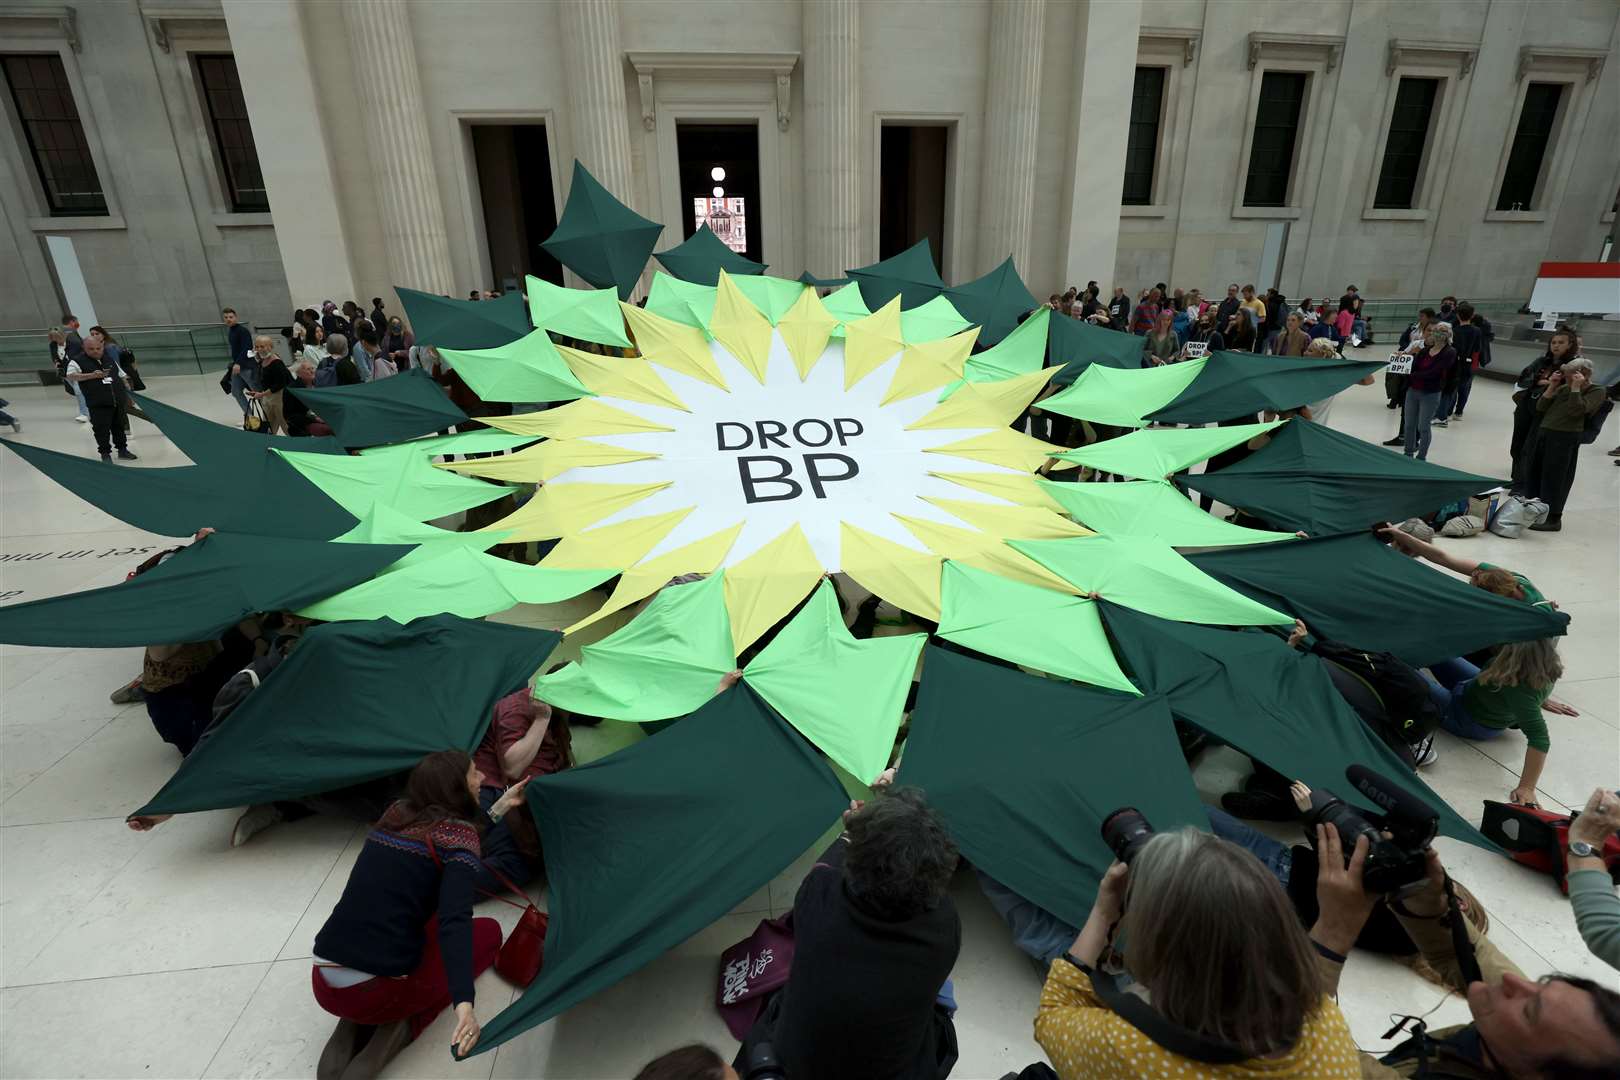 A ‘Drop BP’ sign is displayed at the British Museum in central London during a protest by Extinction Rebellion protesters over the museums sponsorship deal with BP in 2022 (James Manning/PA)